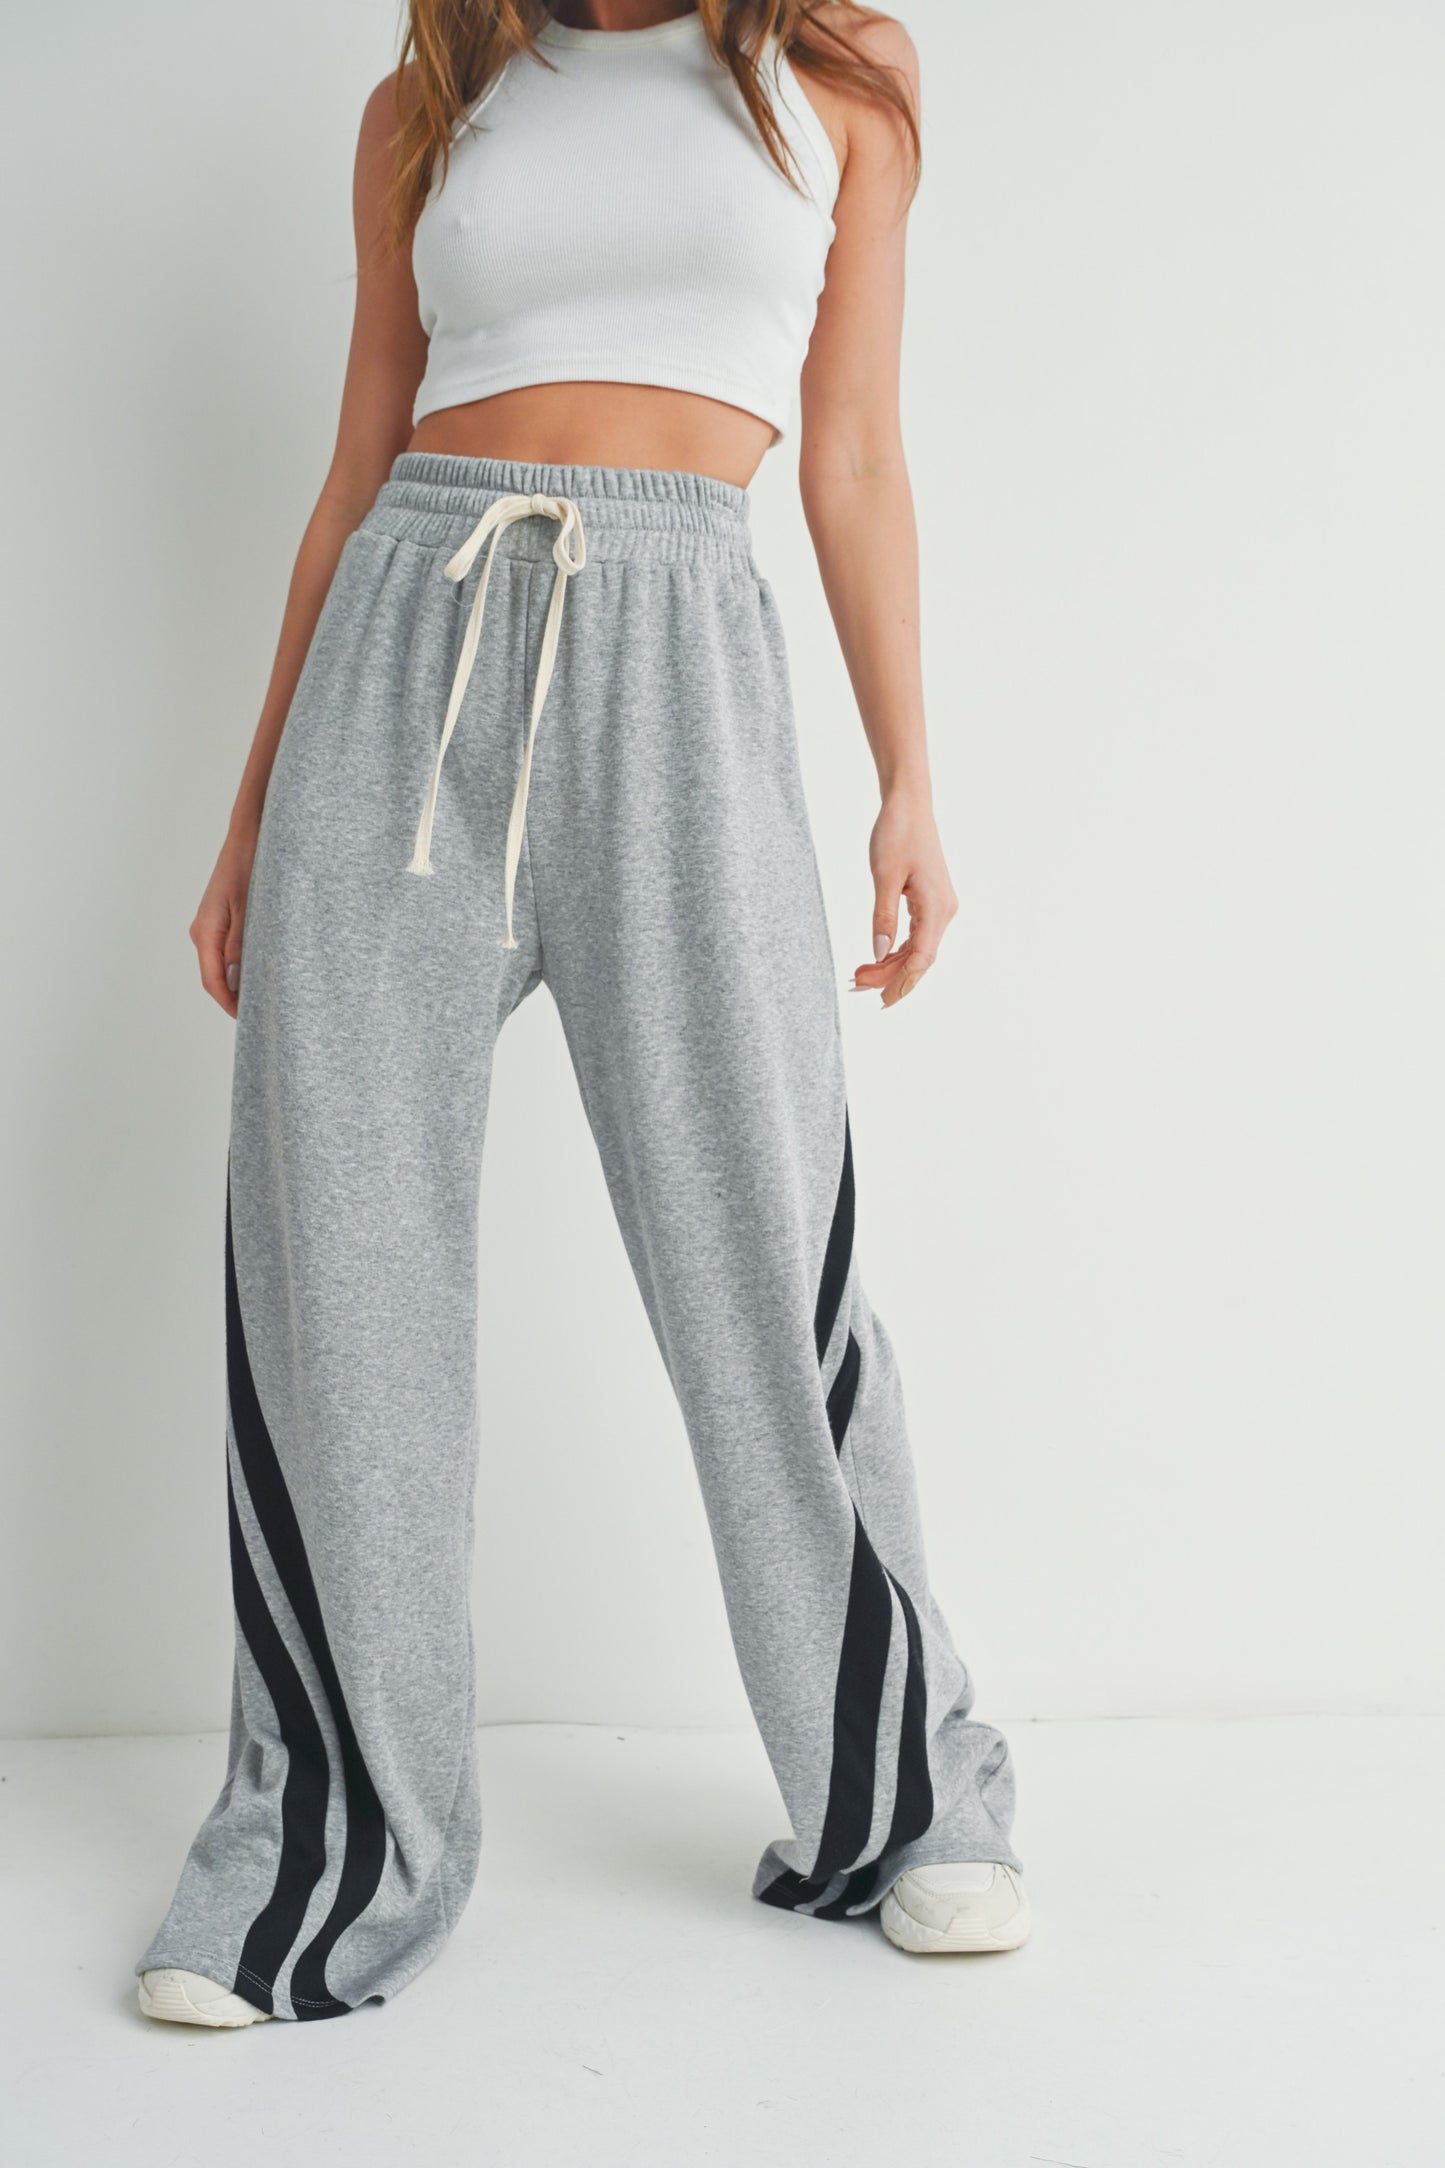 Tall Girl Approved Sweatpants